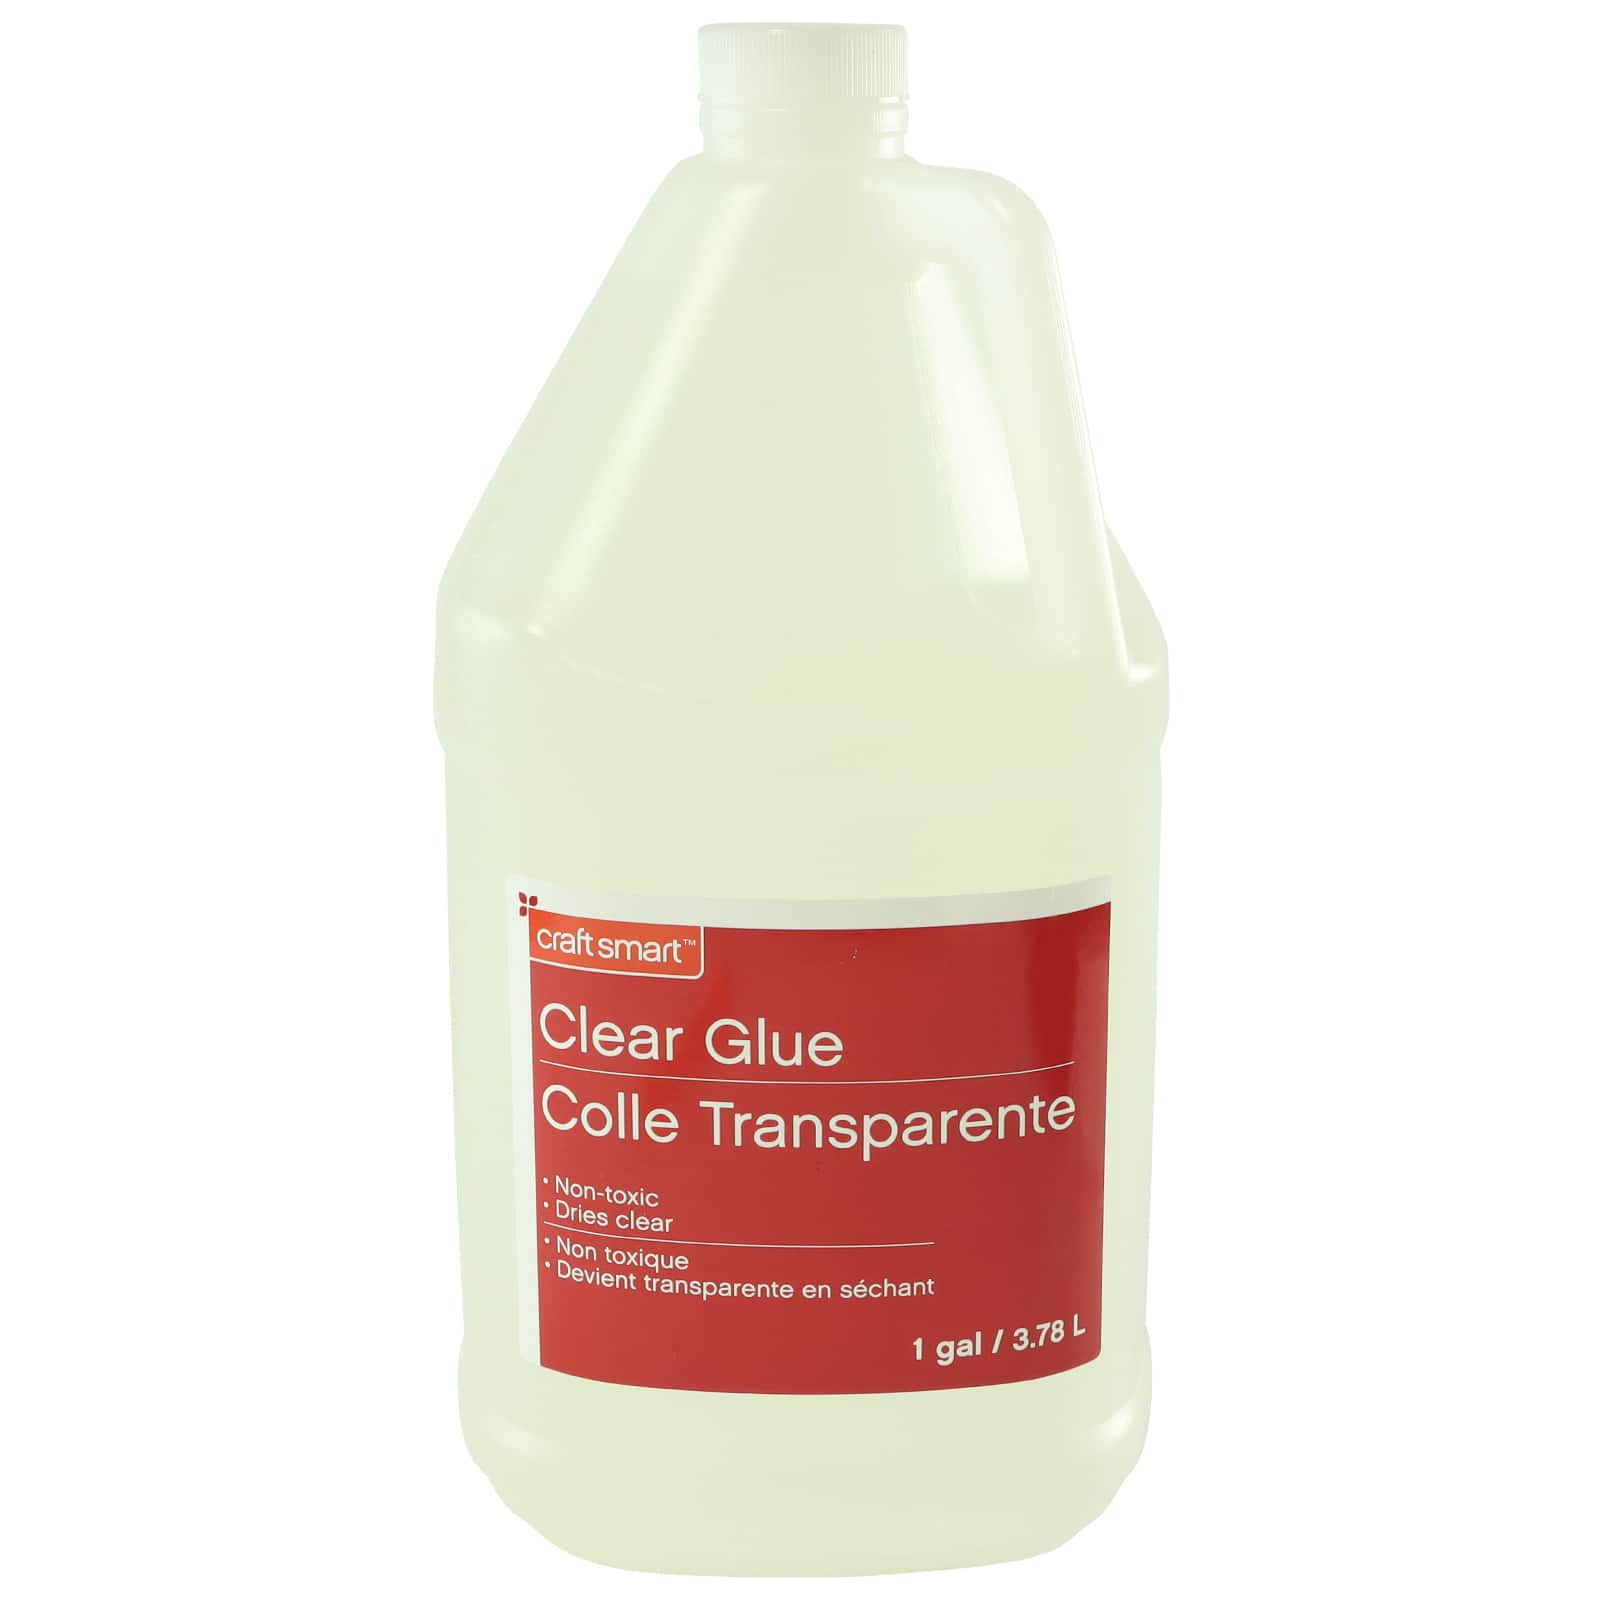 Buy the Elmer's® Washable Clear School Glue, 1 gal. at Michaels